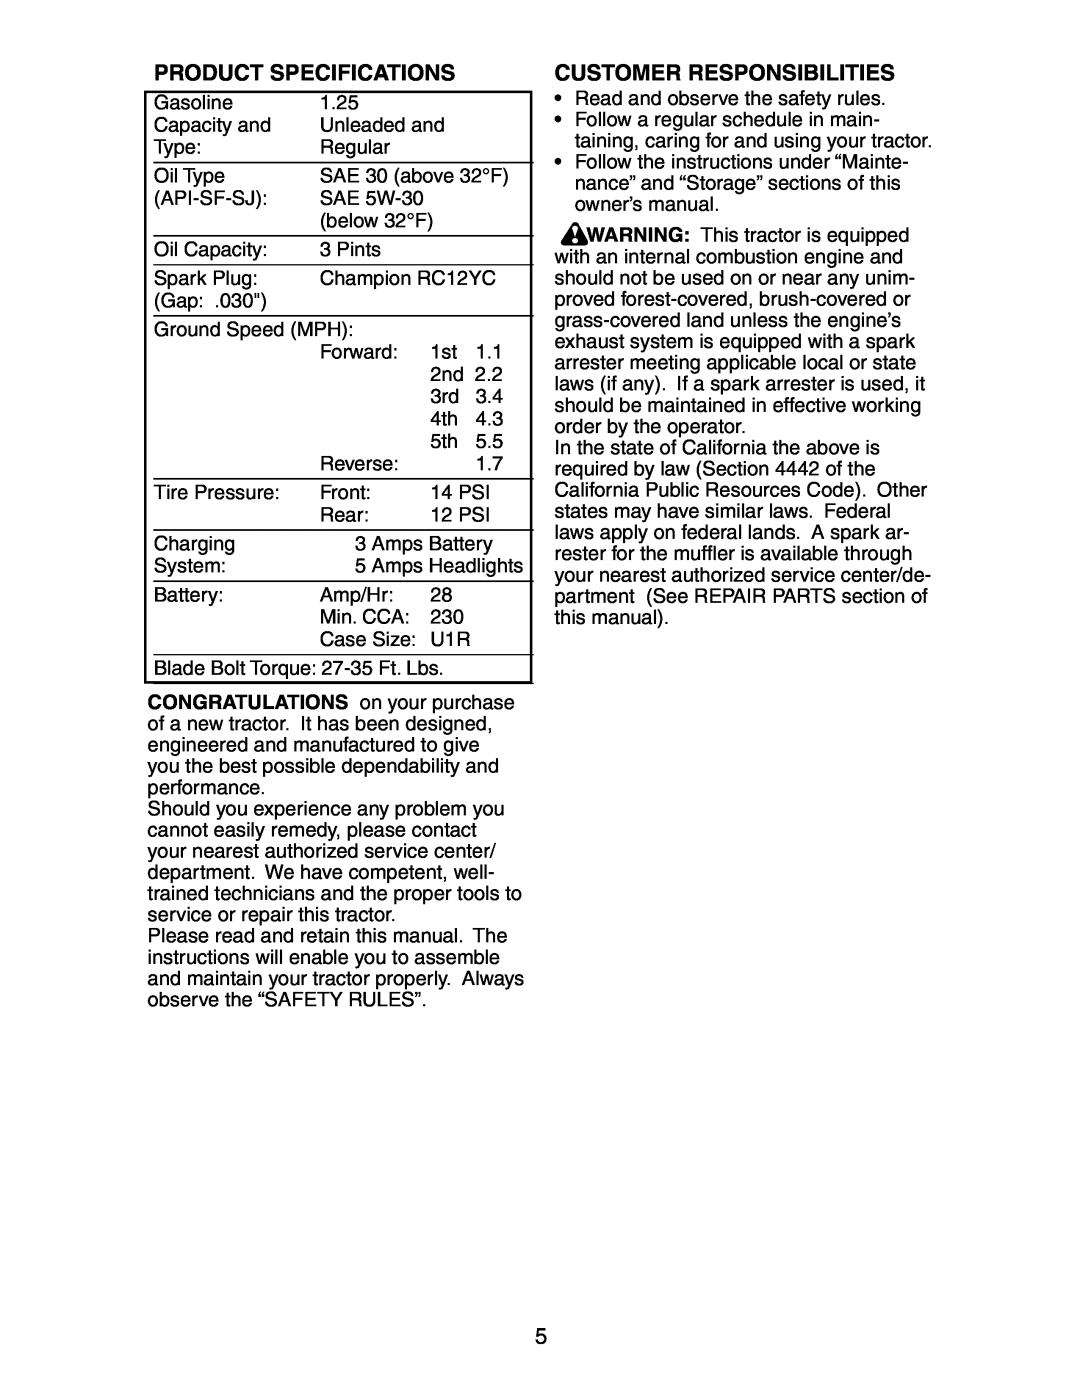 Poulan 271150 manual Product Specifications, Customer Responsibilities 